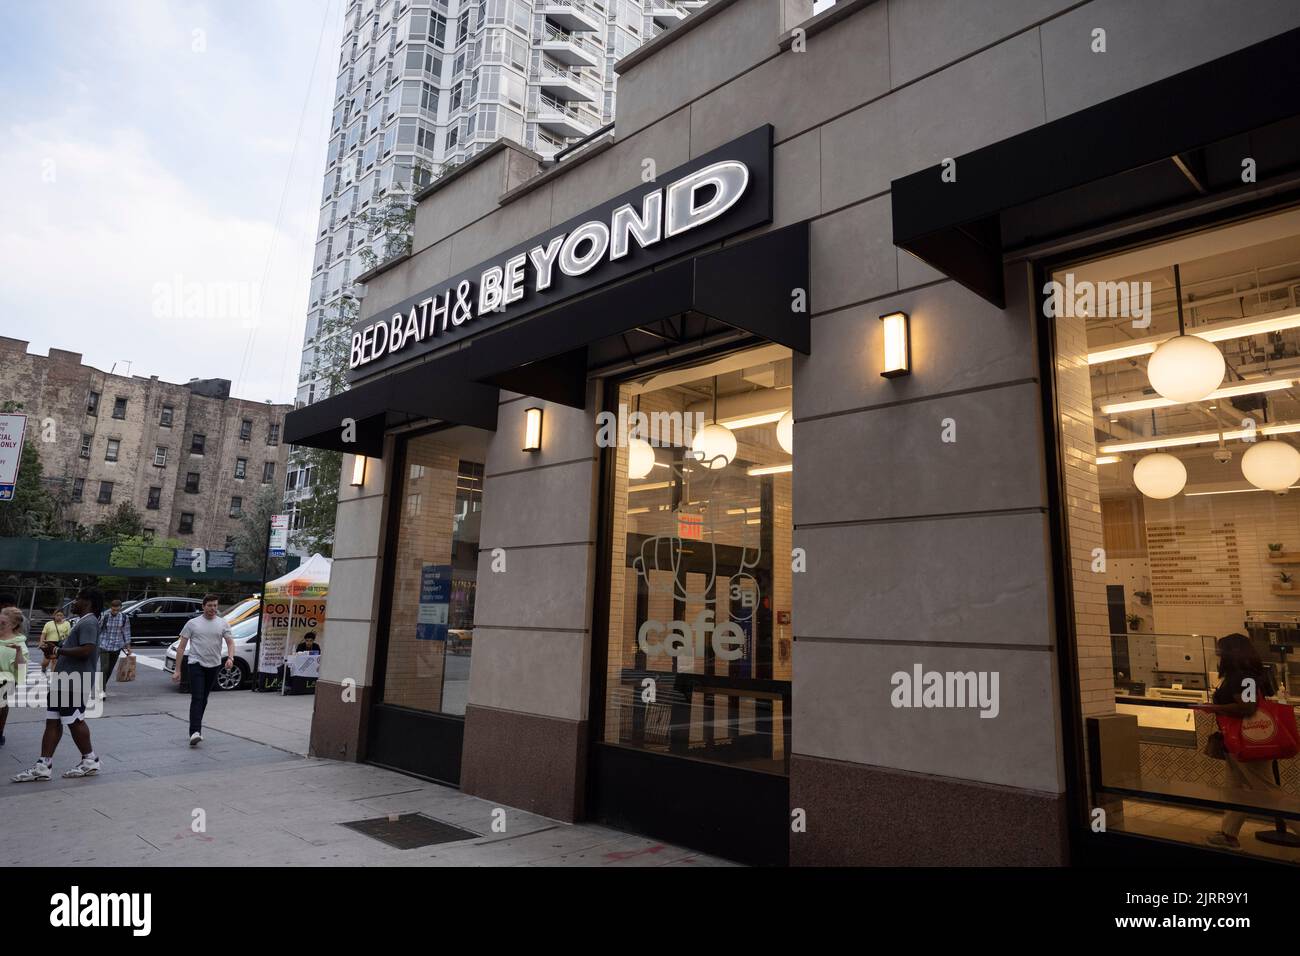 New York, New York, USA. 25th Aug, 2022. August 25, 2022: New York City, USA: A Bed Bath and Beyond location on 3rd Avenue in Midtown Manhattan. $BBBY stock was targeted by the popular meme stock reddit community Wall Street Bets, famous for inflating the price of $GME Gamestop stock, in a short squeeze opportunity to make money off of Private Equity hedge funds attempting to short sale large volumes of retail stocks. Billionaire activist shareholder Ryan Cohen exited from the stock and sold off his 10% stake, but the company recently raised a new loan with the help of J.P. Morgan Chase. (Cr Stock Photo